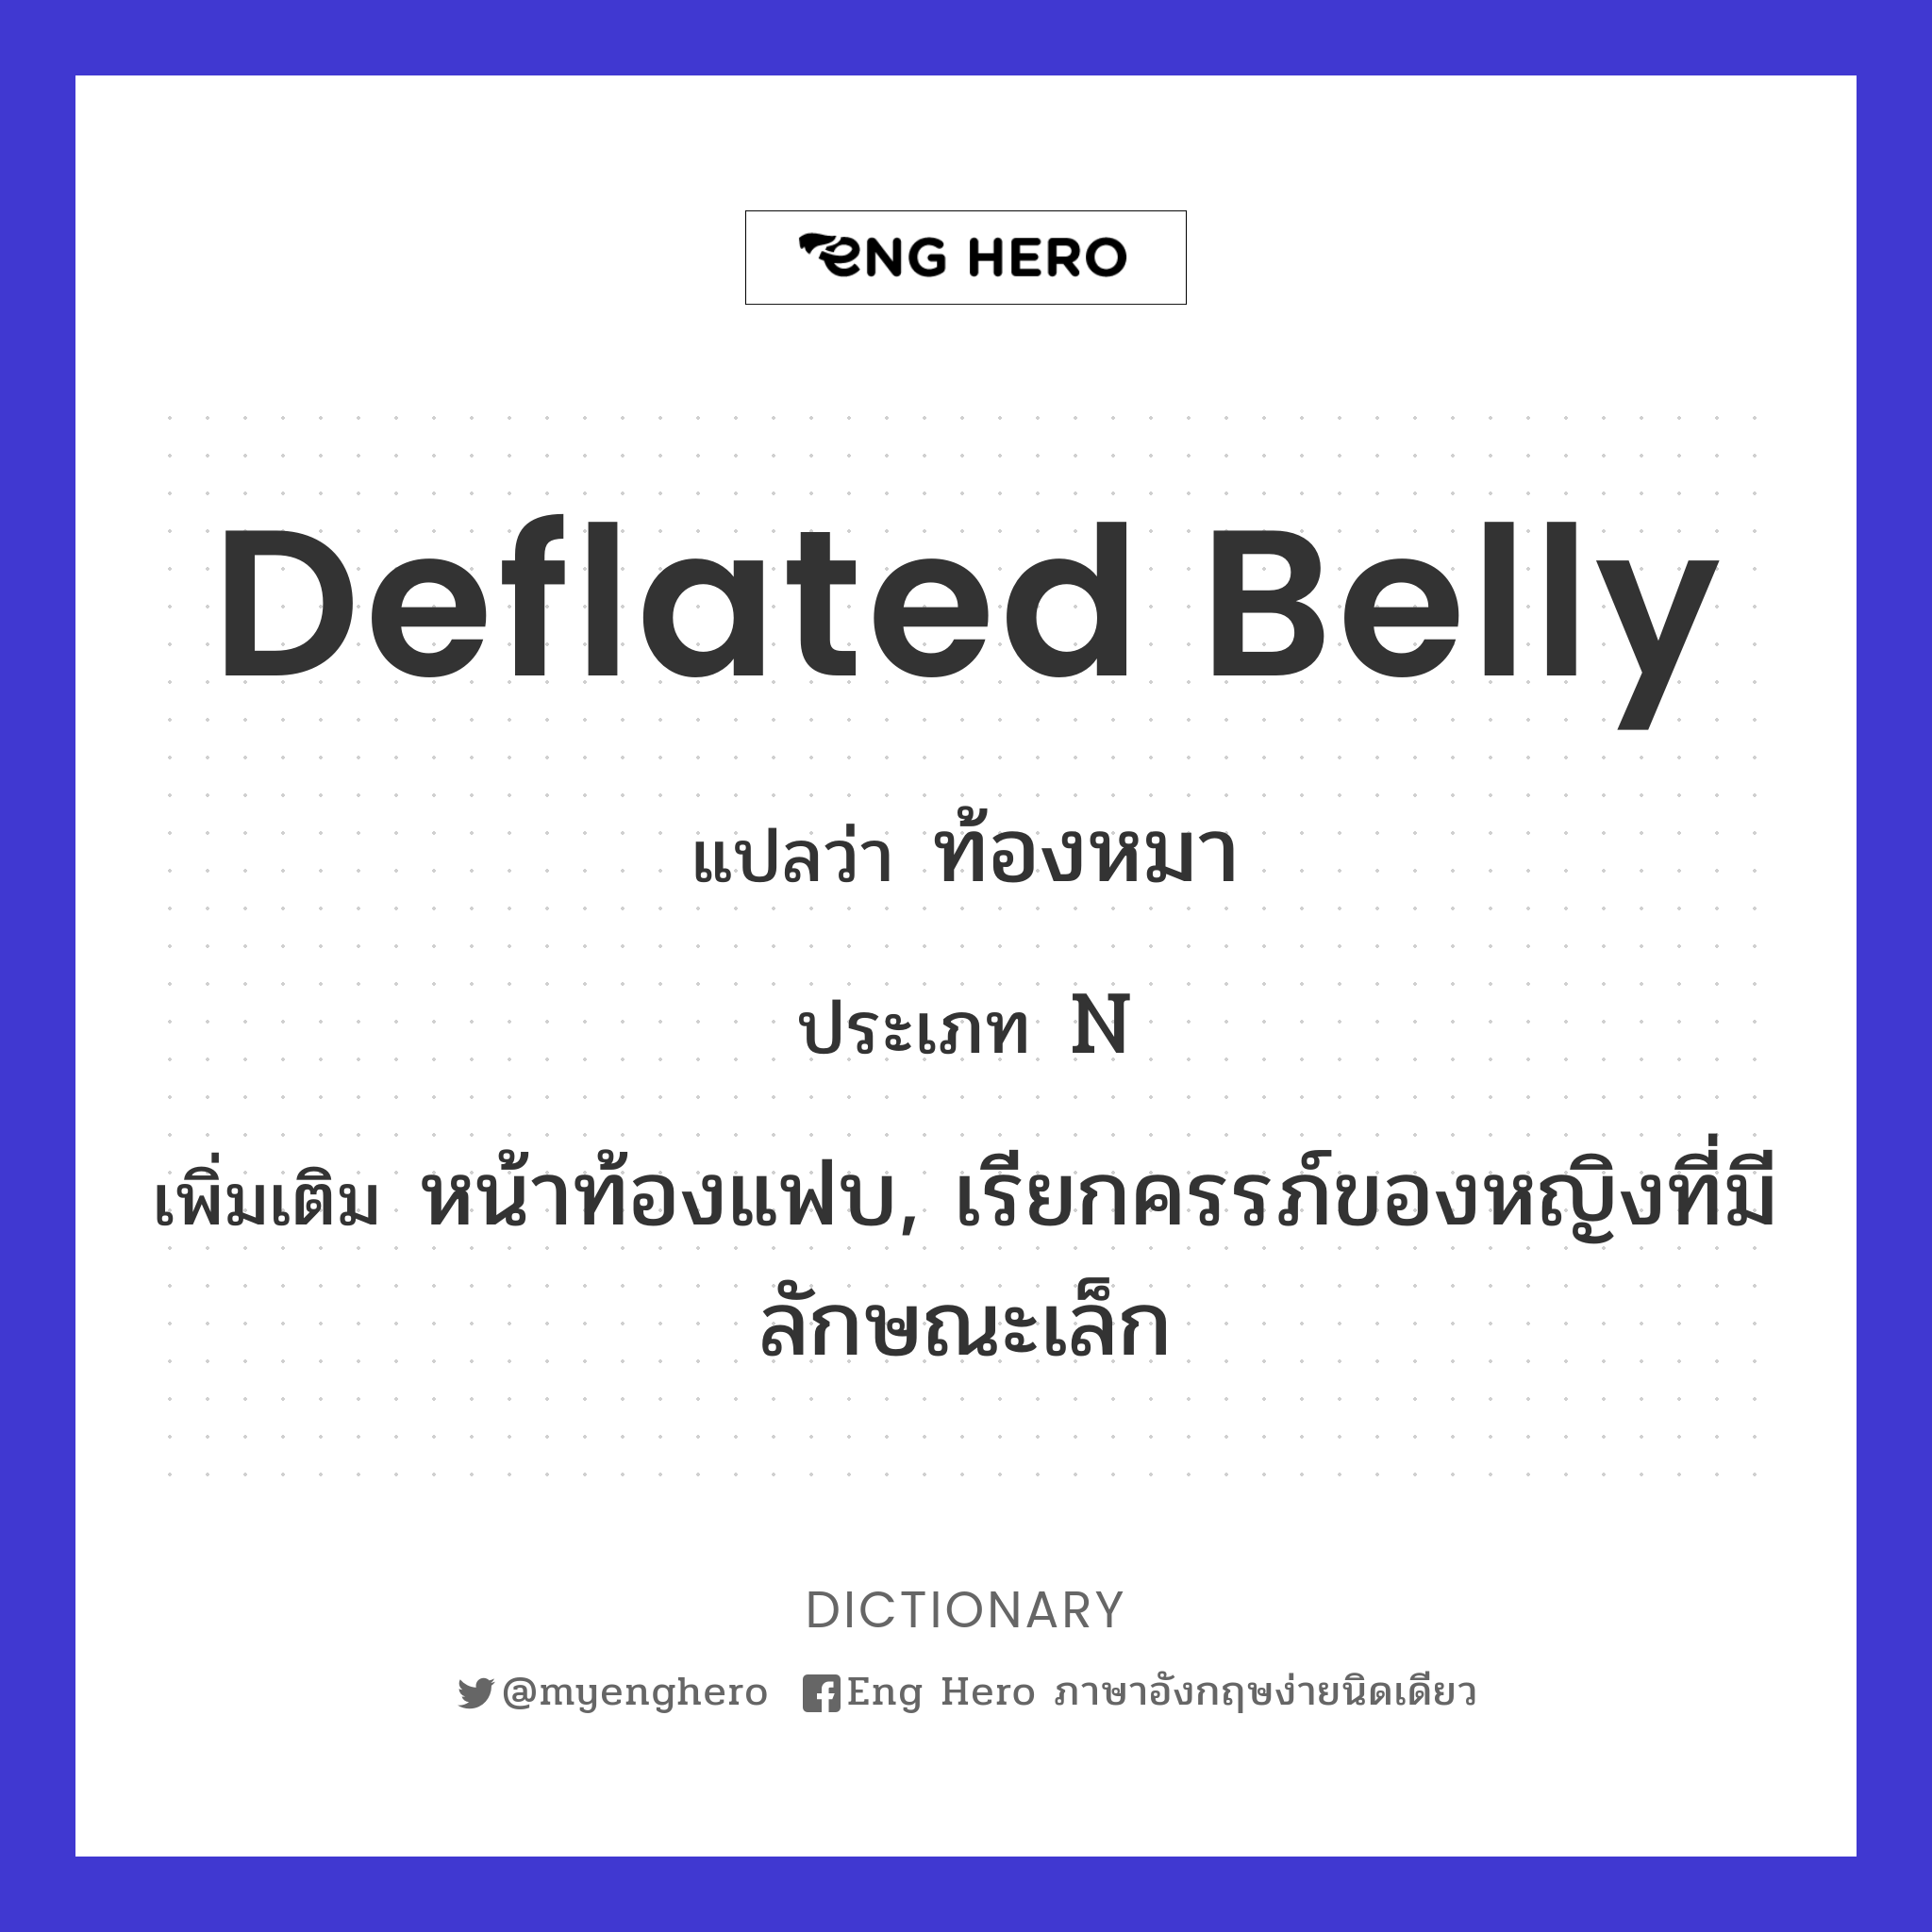 deflated belly